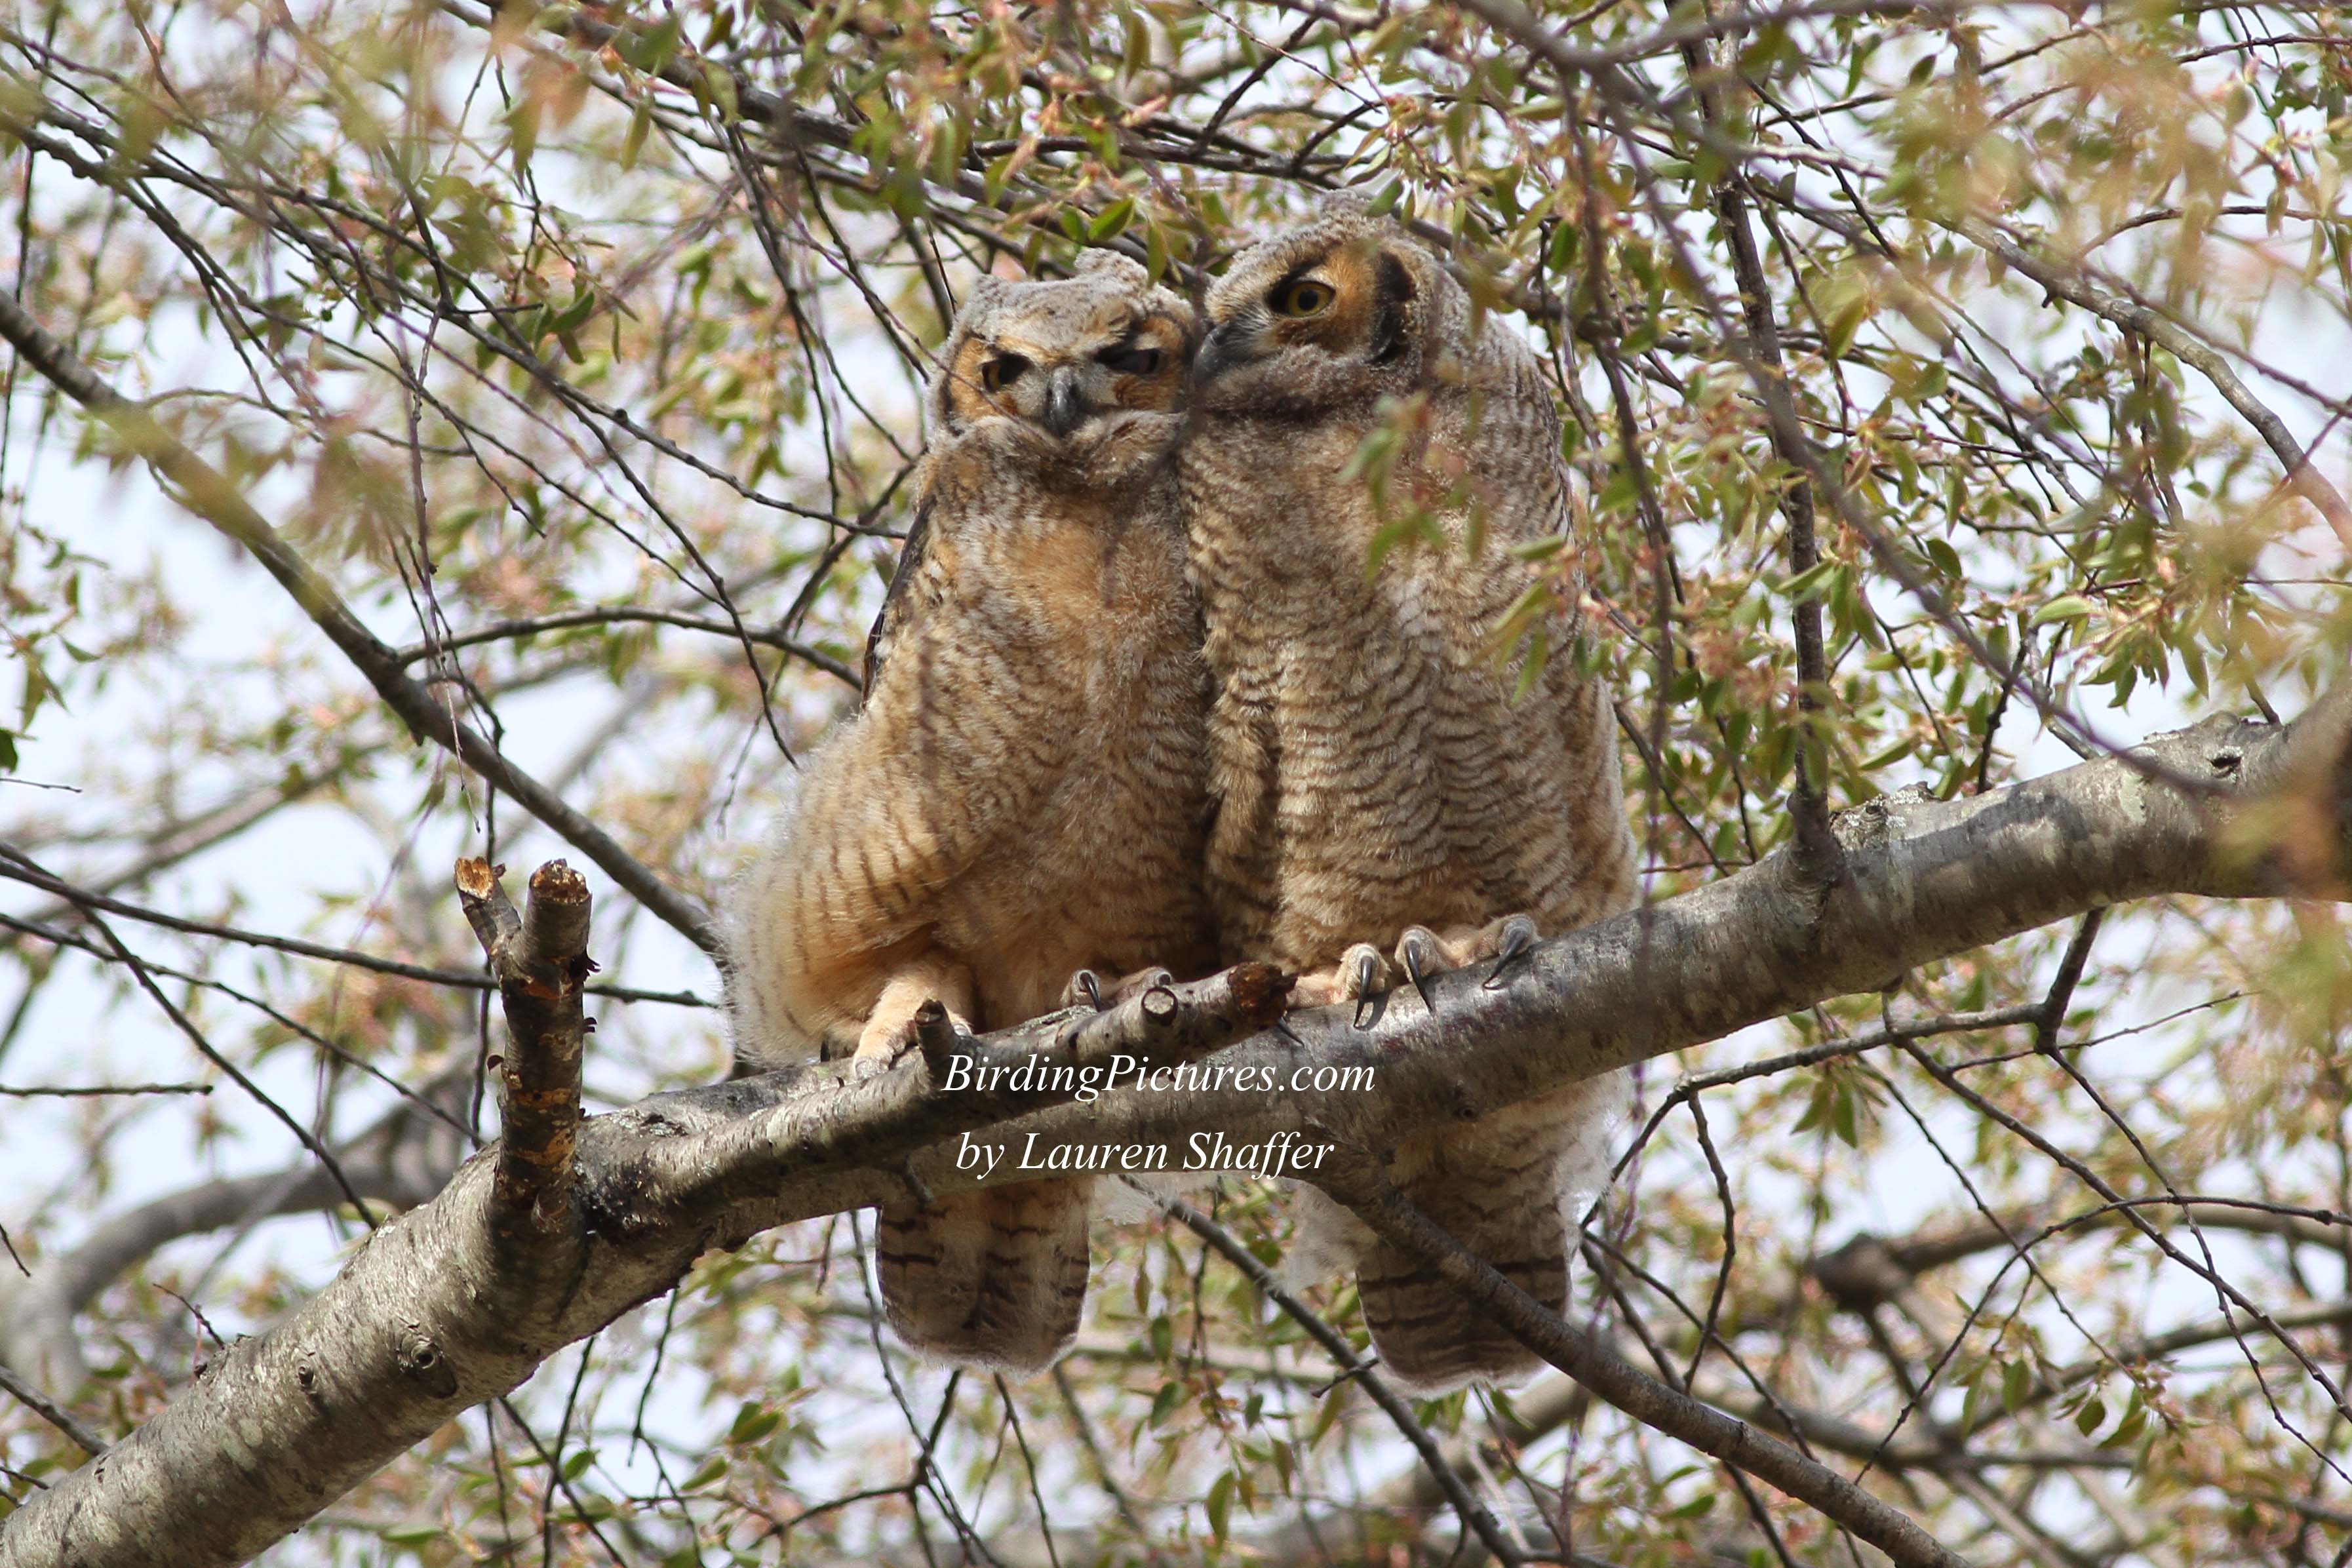 Great Horned Owl family - Birding Pictures